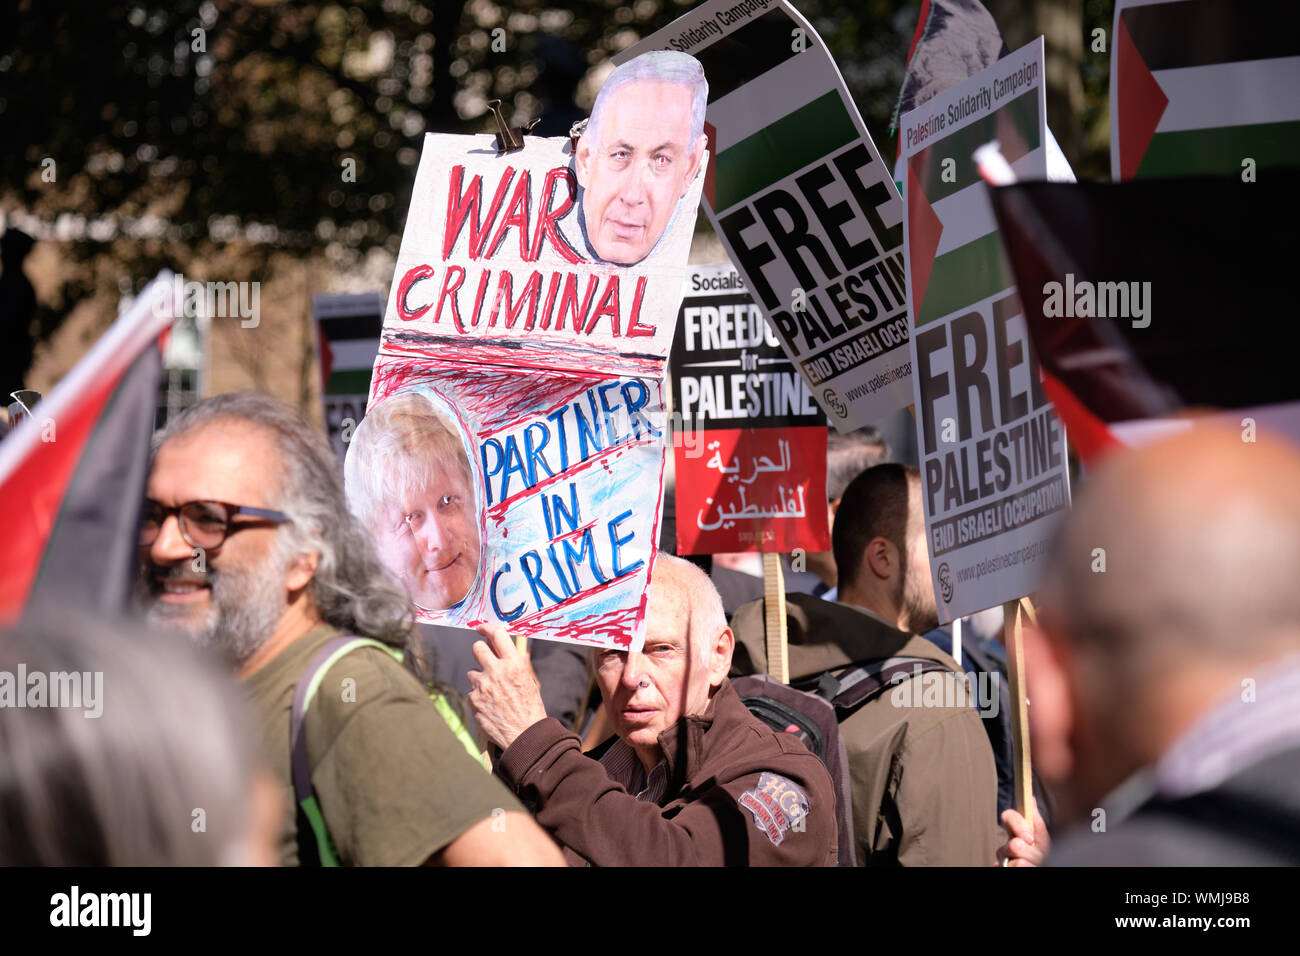 London, UK. September 5th, 2019.  Pro Palestinian supporters in London rally across 10 Downing Street to protest the visit of Israeli Prime Minister Benjamin Netanyahu.  Hundreds gatherer with signs and flags denouncing Boris Johnson and Netanyahu impromptu meeting under heavy police surveillance. Pro Palestine supporter with a War Criminal sign with Netanyahu. Credit: JF Pelletier/Alamy Live News. Stock Photo